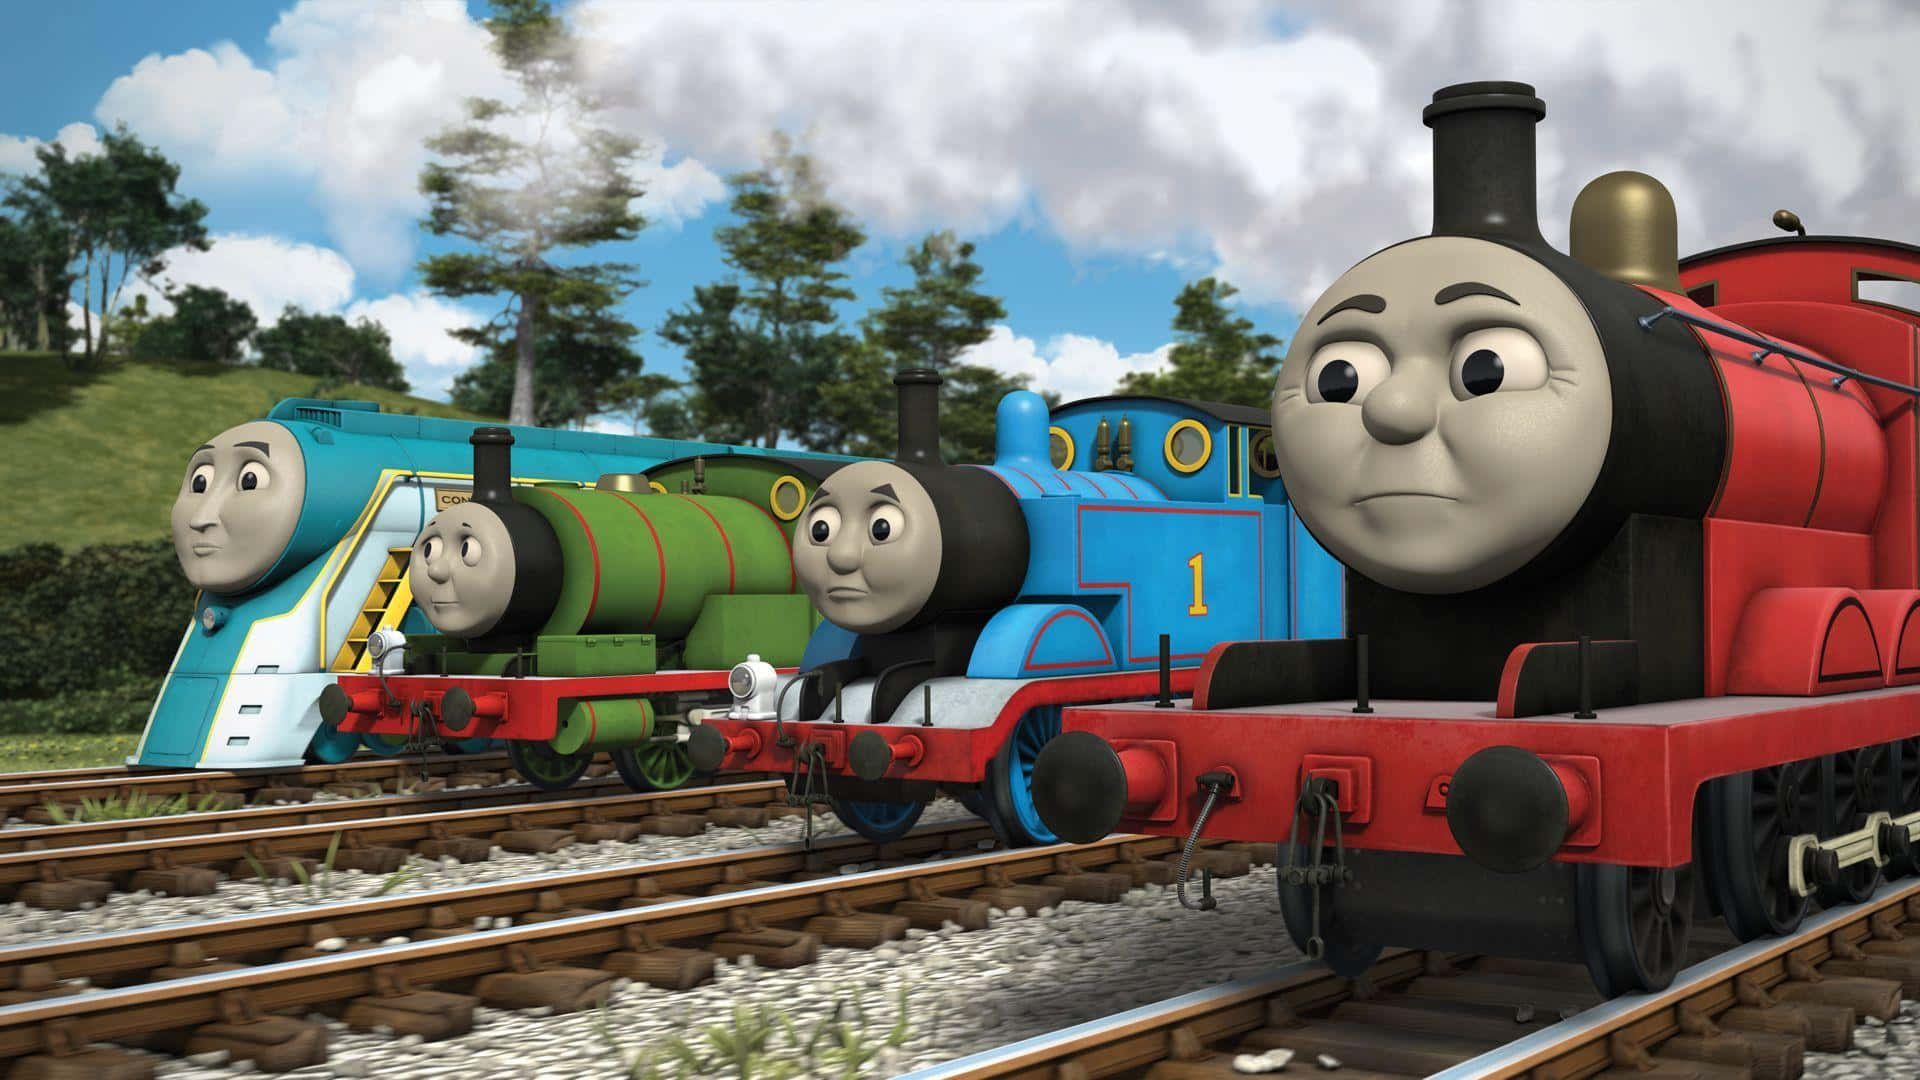 Thomas And Friends With Serious Looks Wallpaper